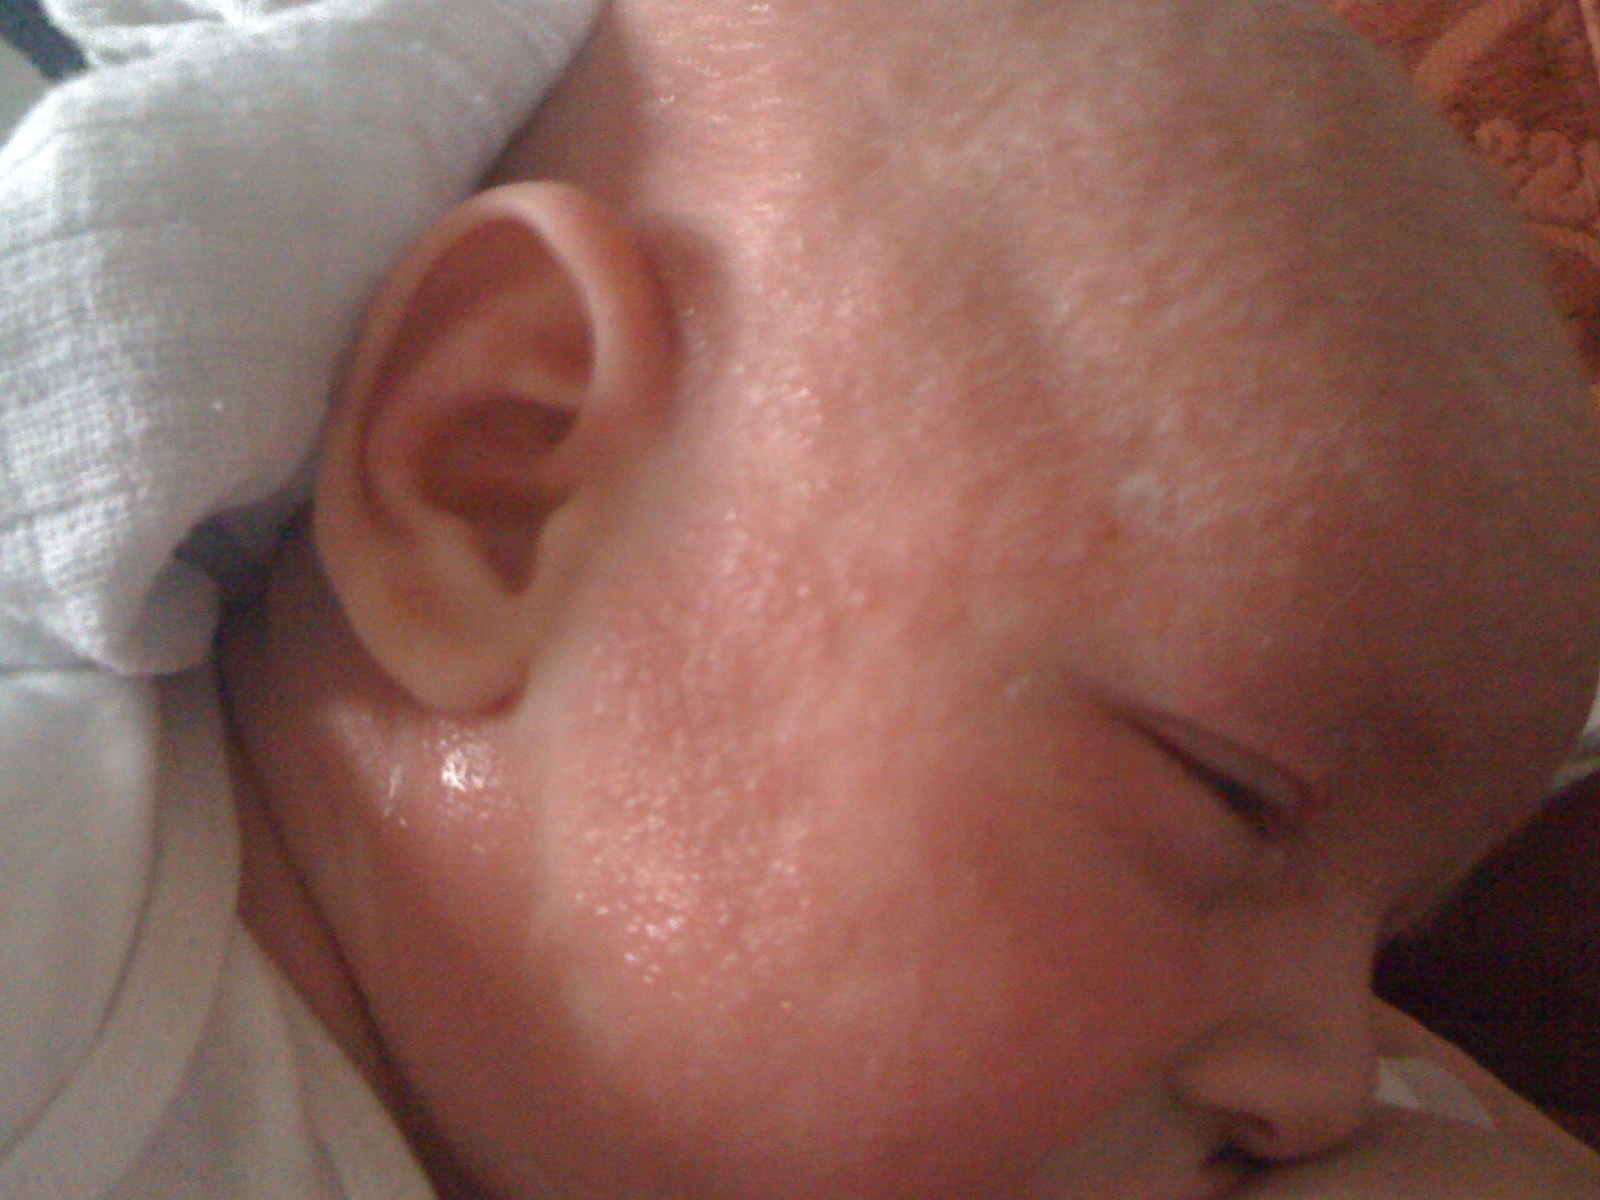 8 weeks old severe reaction - Callum at just 8 weeks old with a severe allergic reaction caused by CMPA. Covered in pus, very swollen face, and eyes like slits. www.intolerantgourmand.com